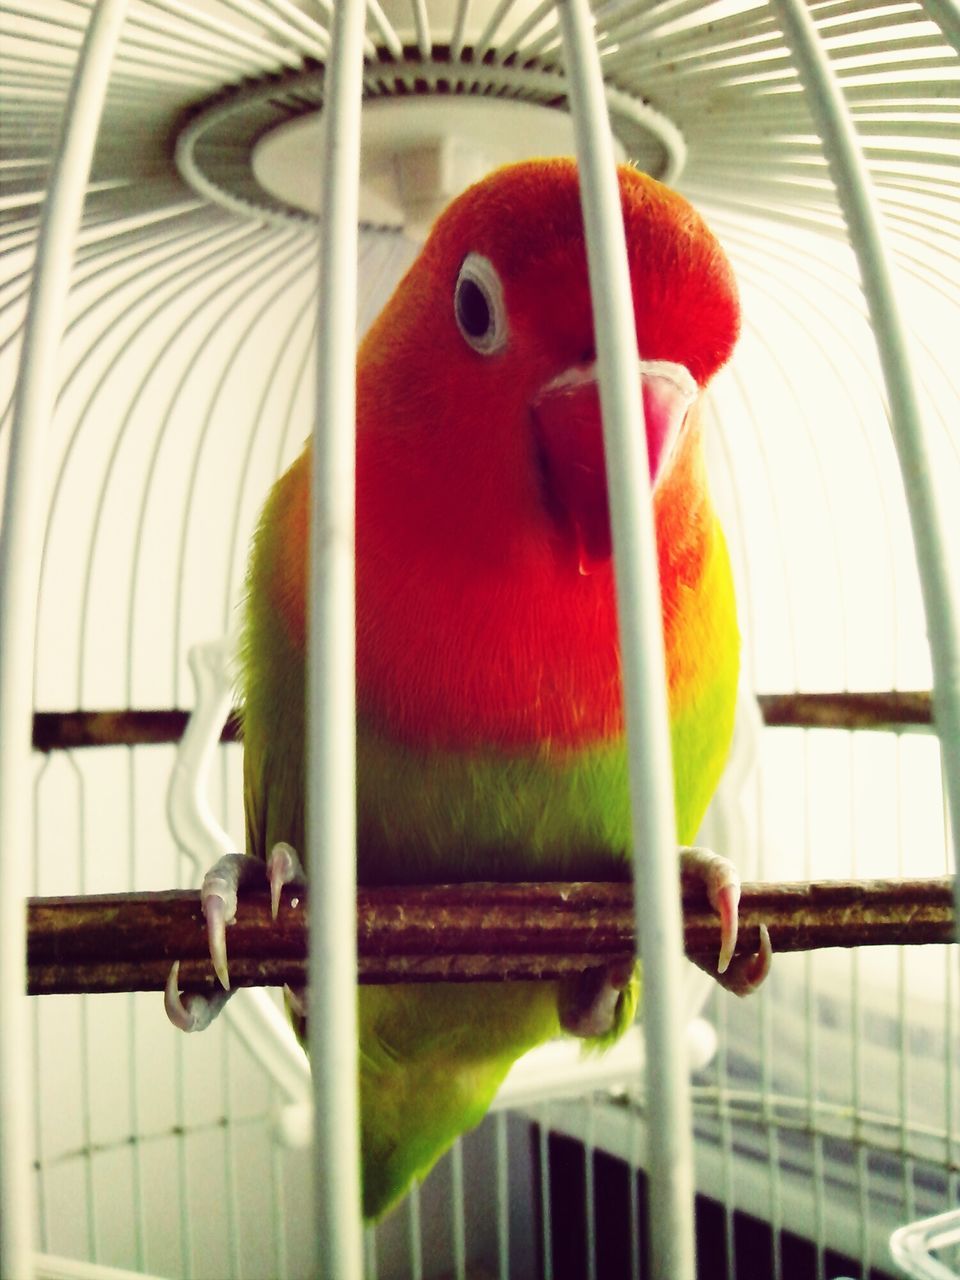 animal themes, bird, cage, indoors, close-up, one animal, parrot, animals in captivity, red, beak, animal representation, no people, birdcage, wildlife, animals in the wild, day, focus on foreground, multi colored, metal, food